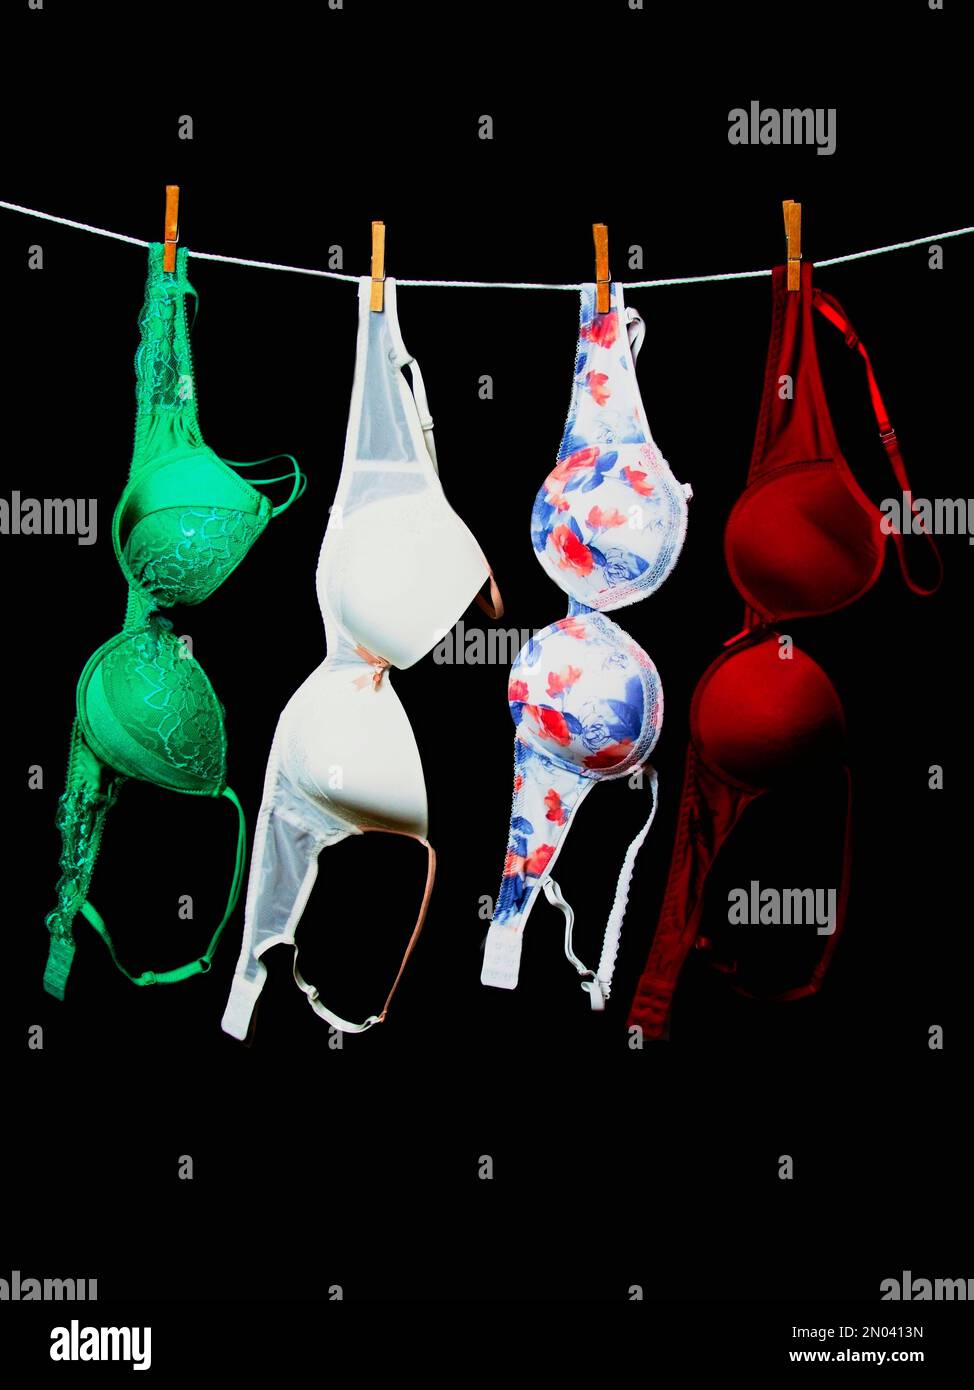 Colorful women's bras on a string and a black background Stock